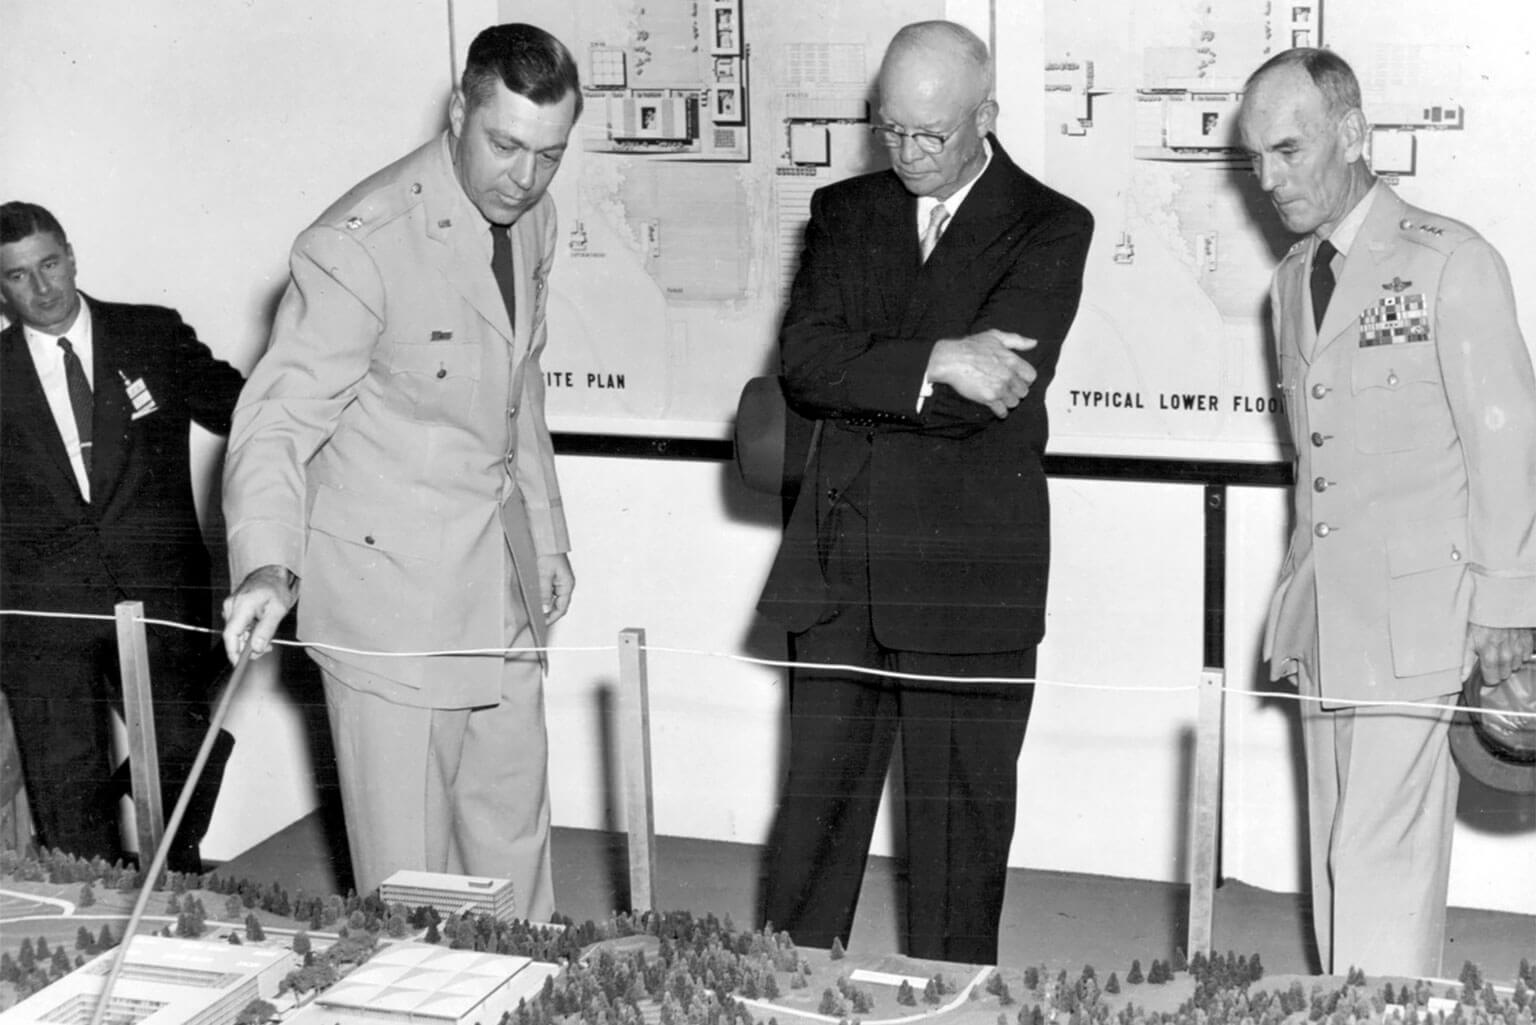 President Dwight D. Eisenhower reviews building plans for the U.S. Air Force Academy in 1955.